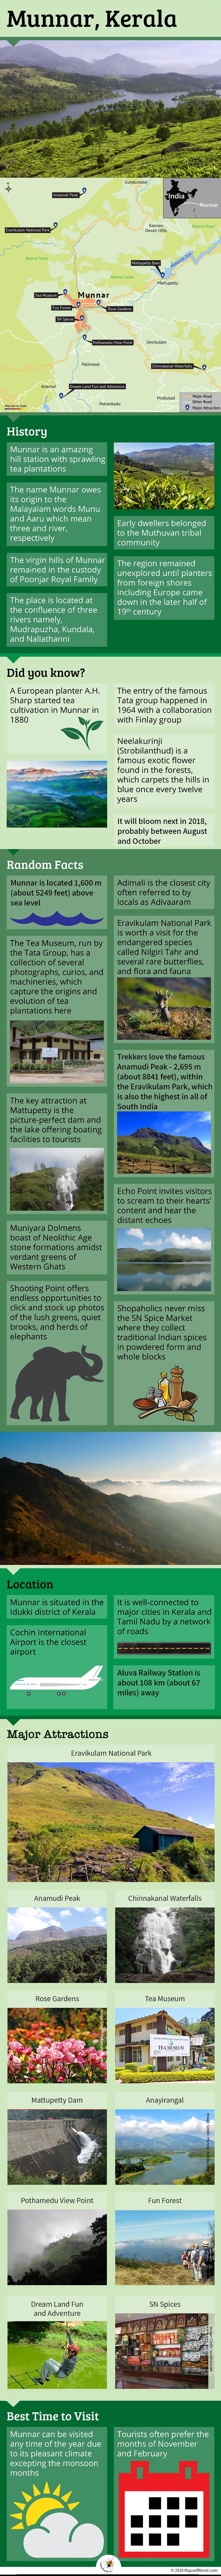 Infographic Depicting Munnar Tourist Attractions